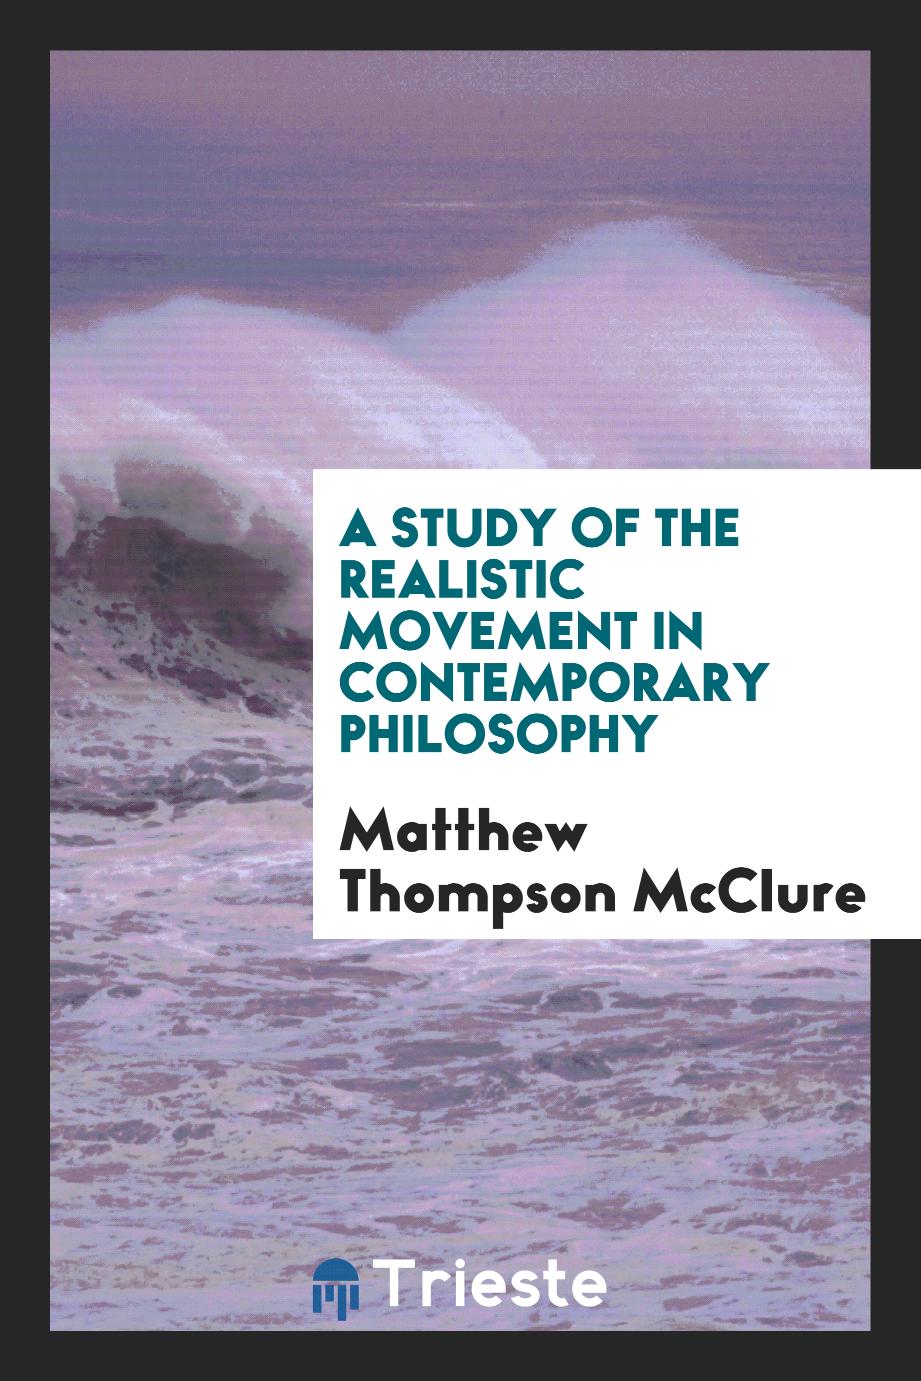 A Study of the Realistic Movement in Contemporary Philosophy